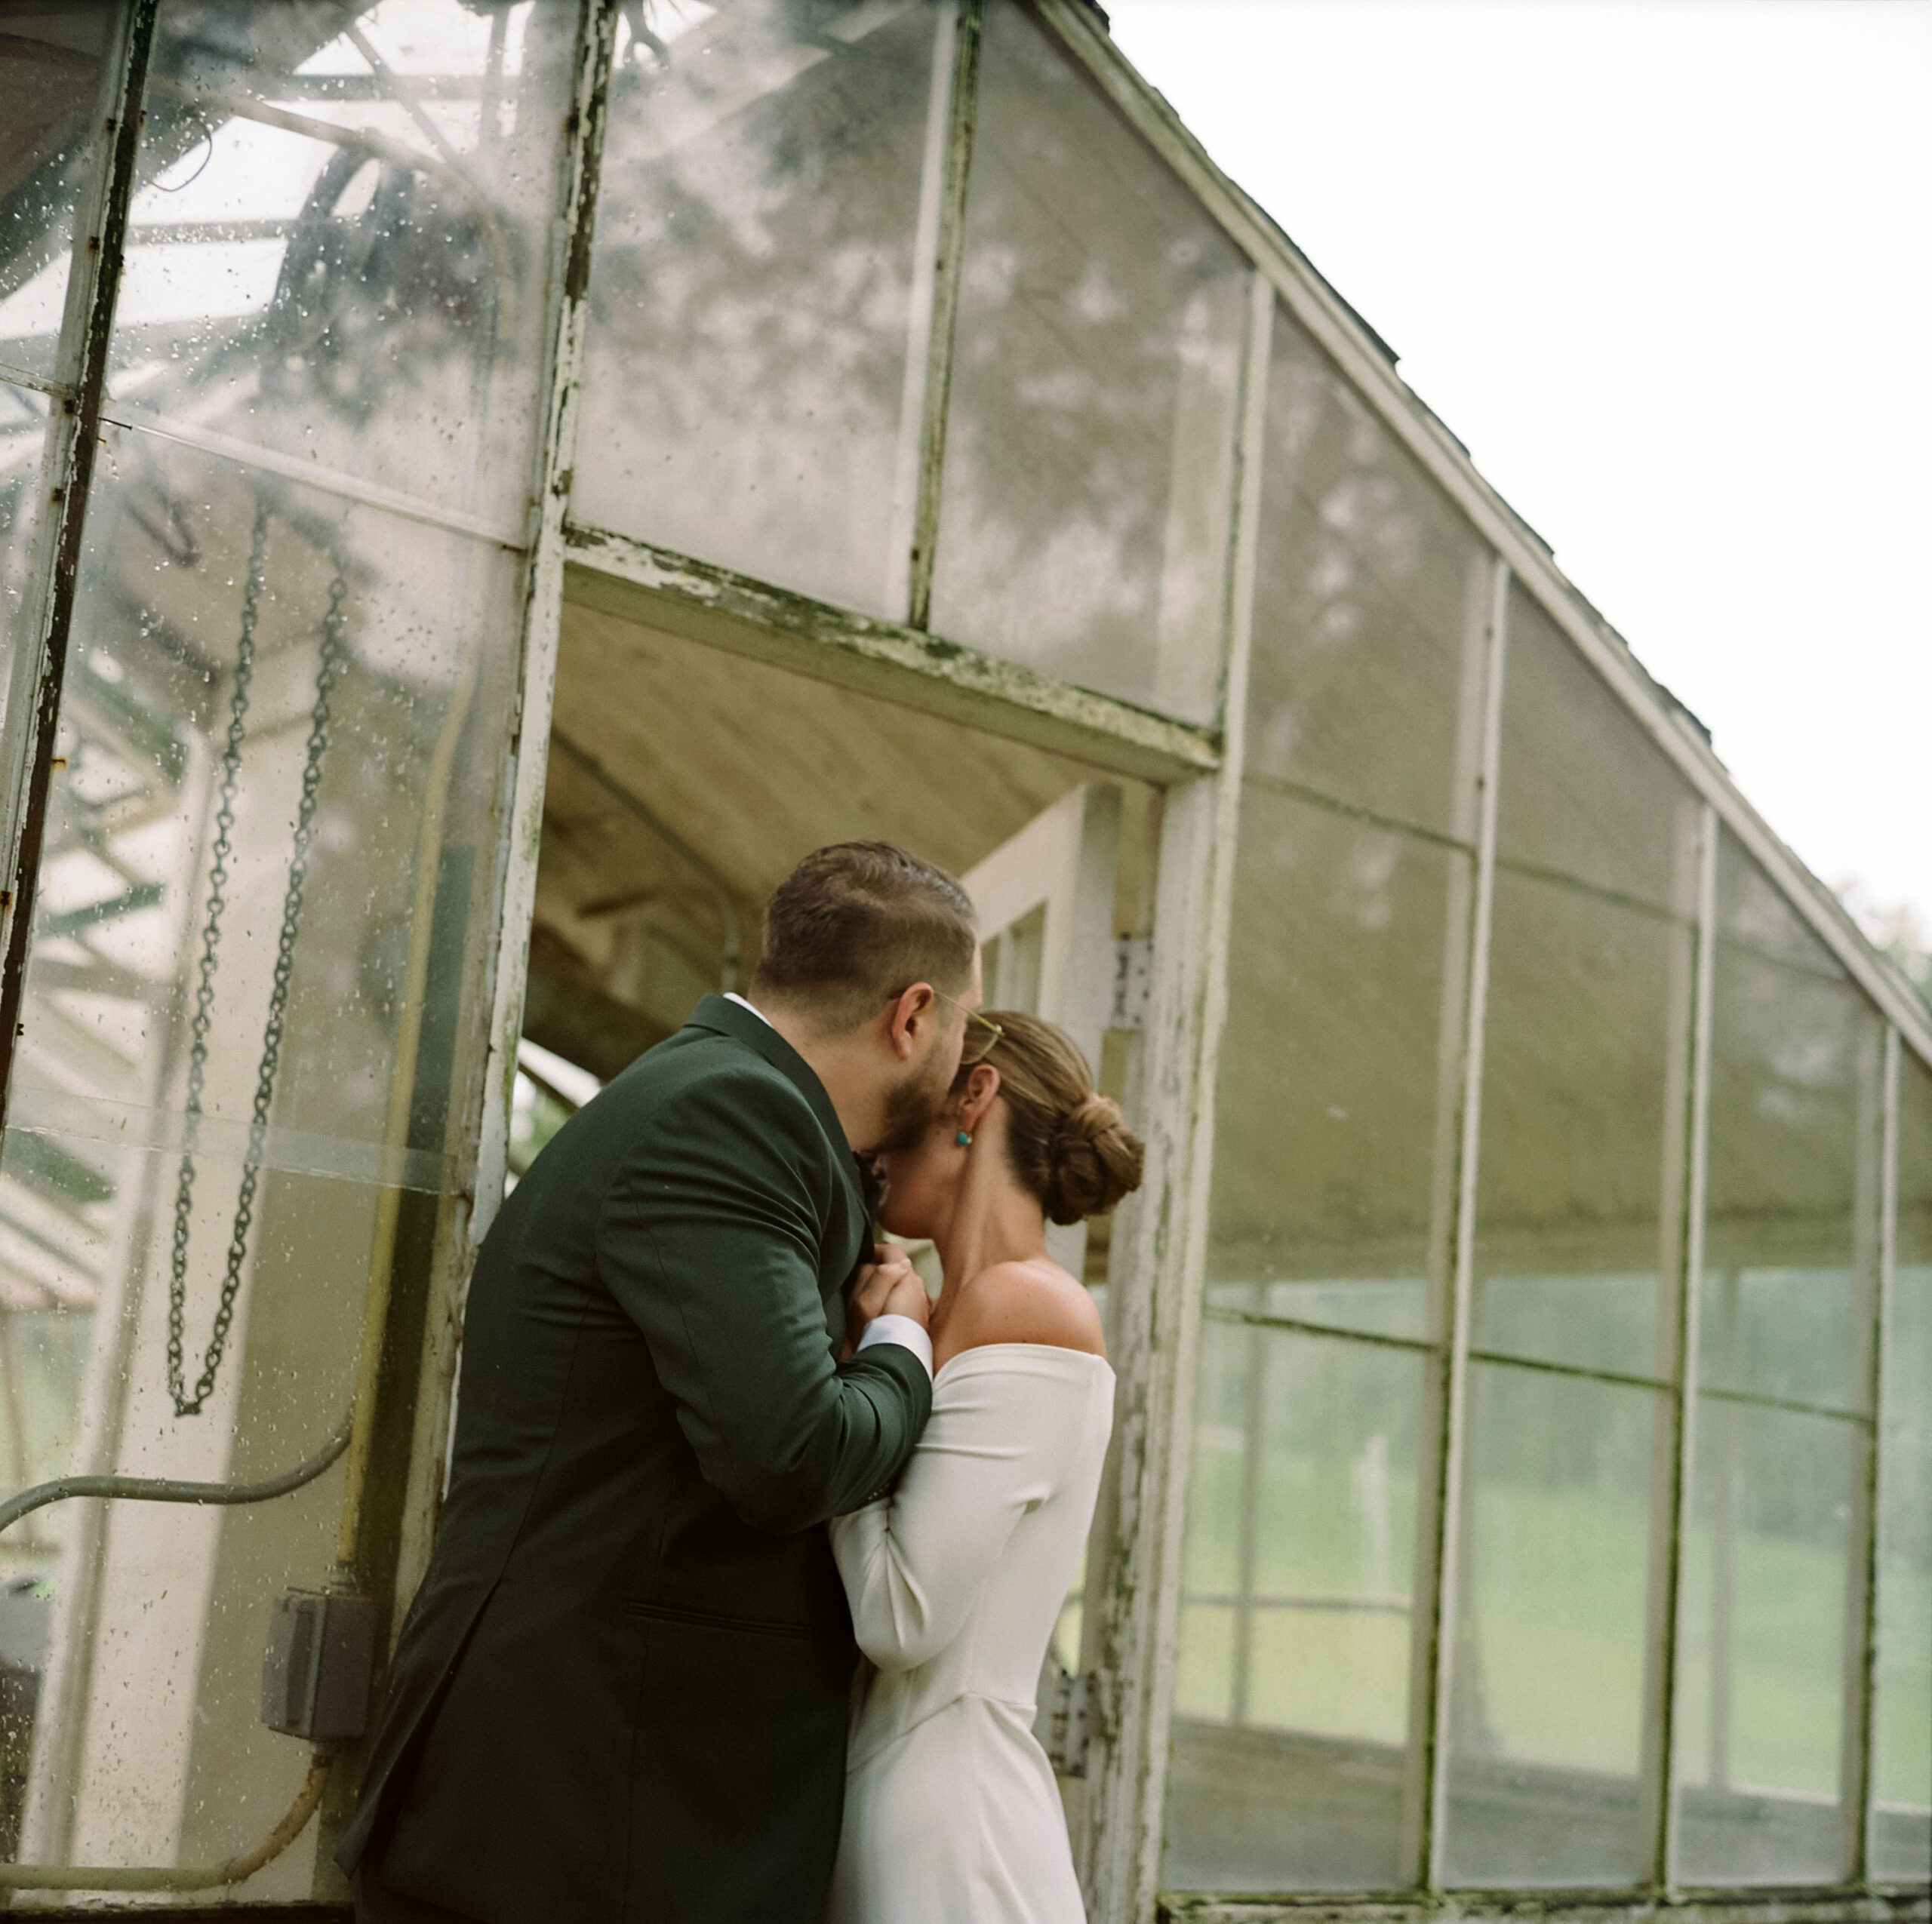 Groom sweetly kisses the forehead of the bride in front of a greenhouse after their wedding ceremony at Chimney Hill Estate Inn in Lambertville, NJ